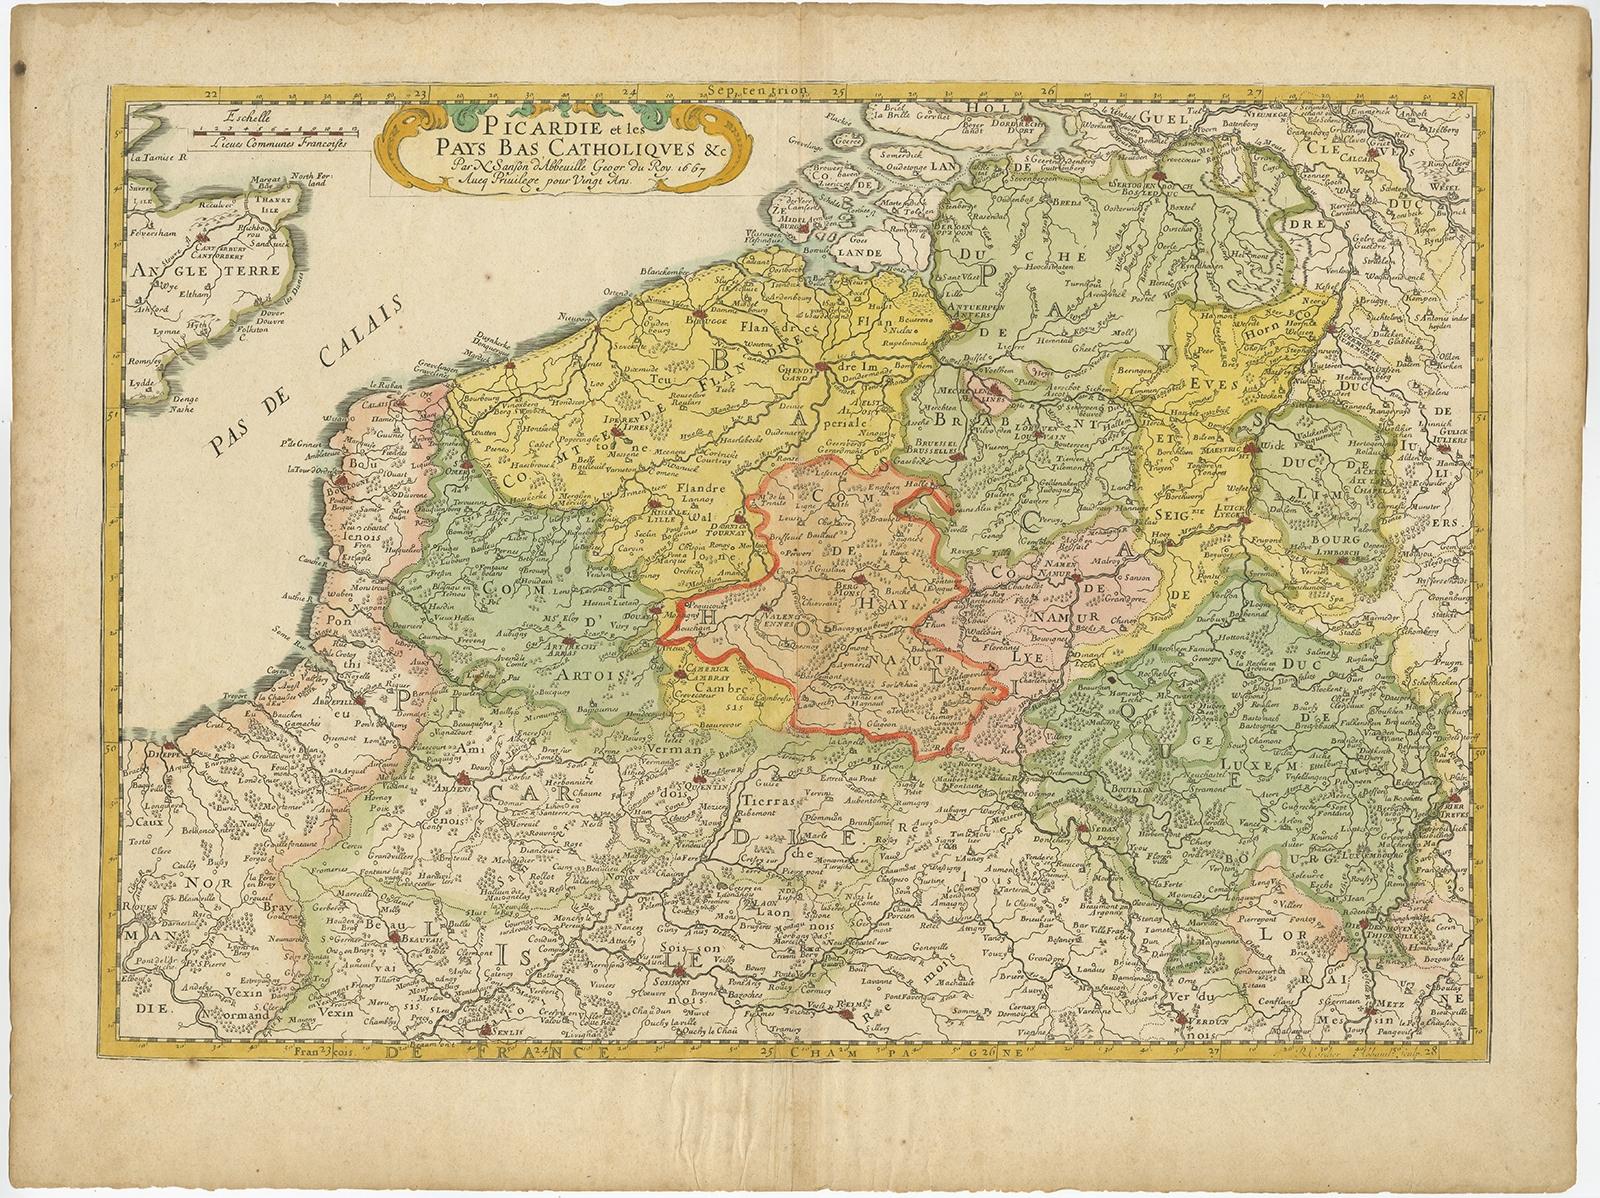 Antique map titled 'Picardie et les Pays Bas Catholiques (..)'. 

Detailed regional map of Northwestern France and Catholic Belgium, from an early edition of Sanson's Atlas.

Artists and Engravers: Nicholas Sanson (1600-1667) is considered the